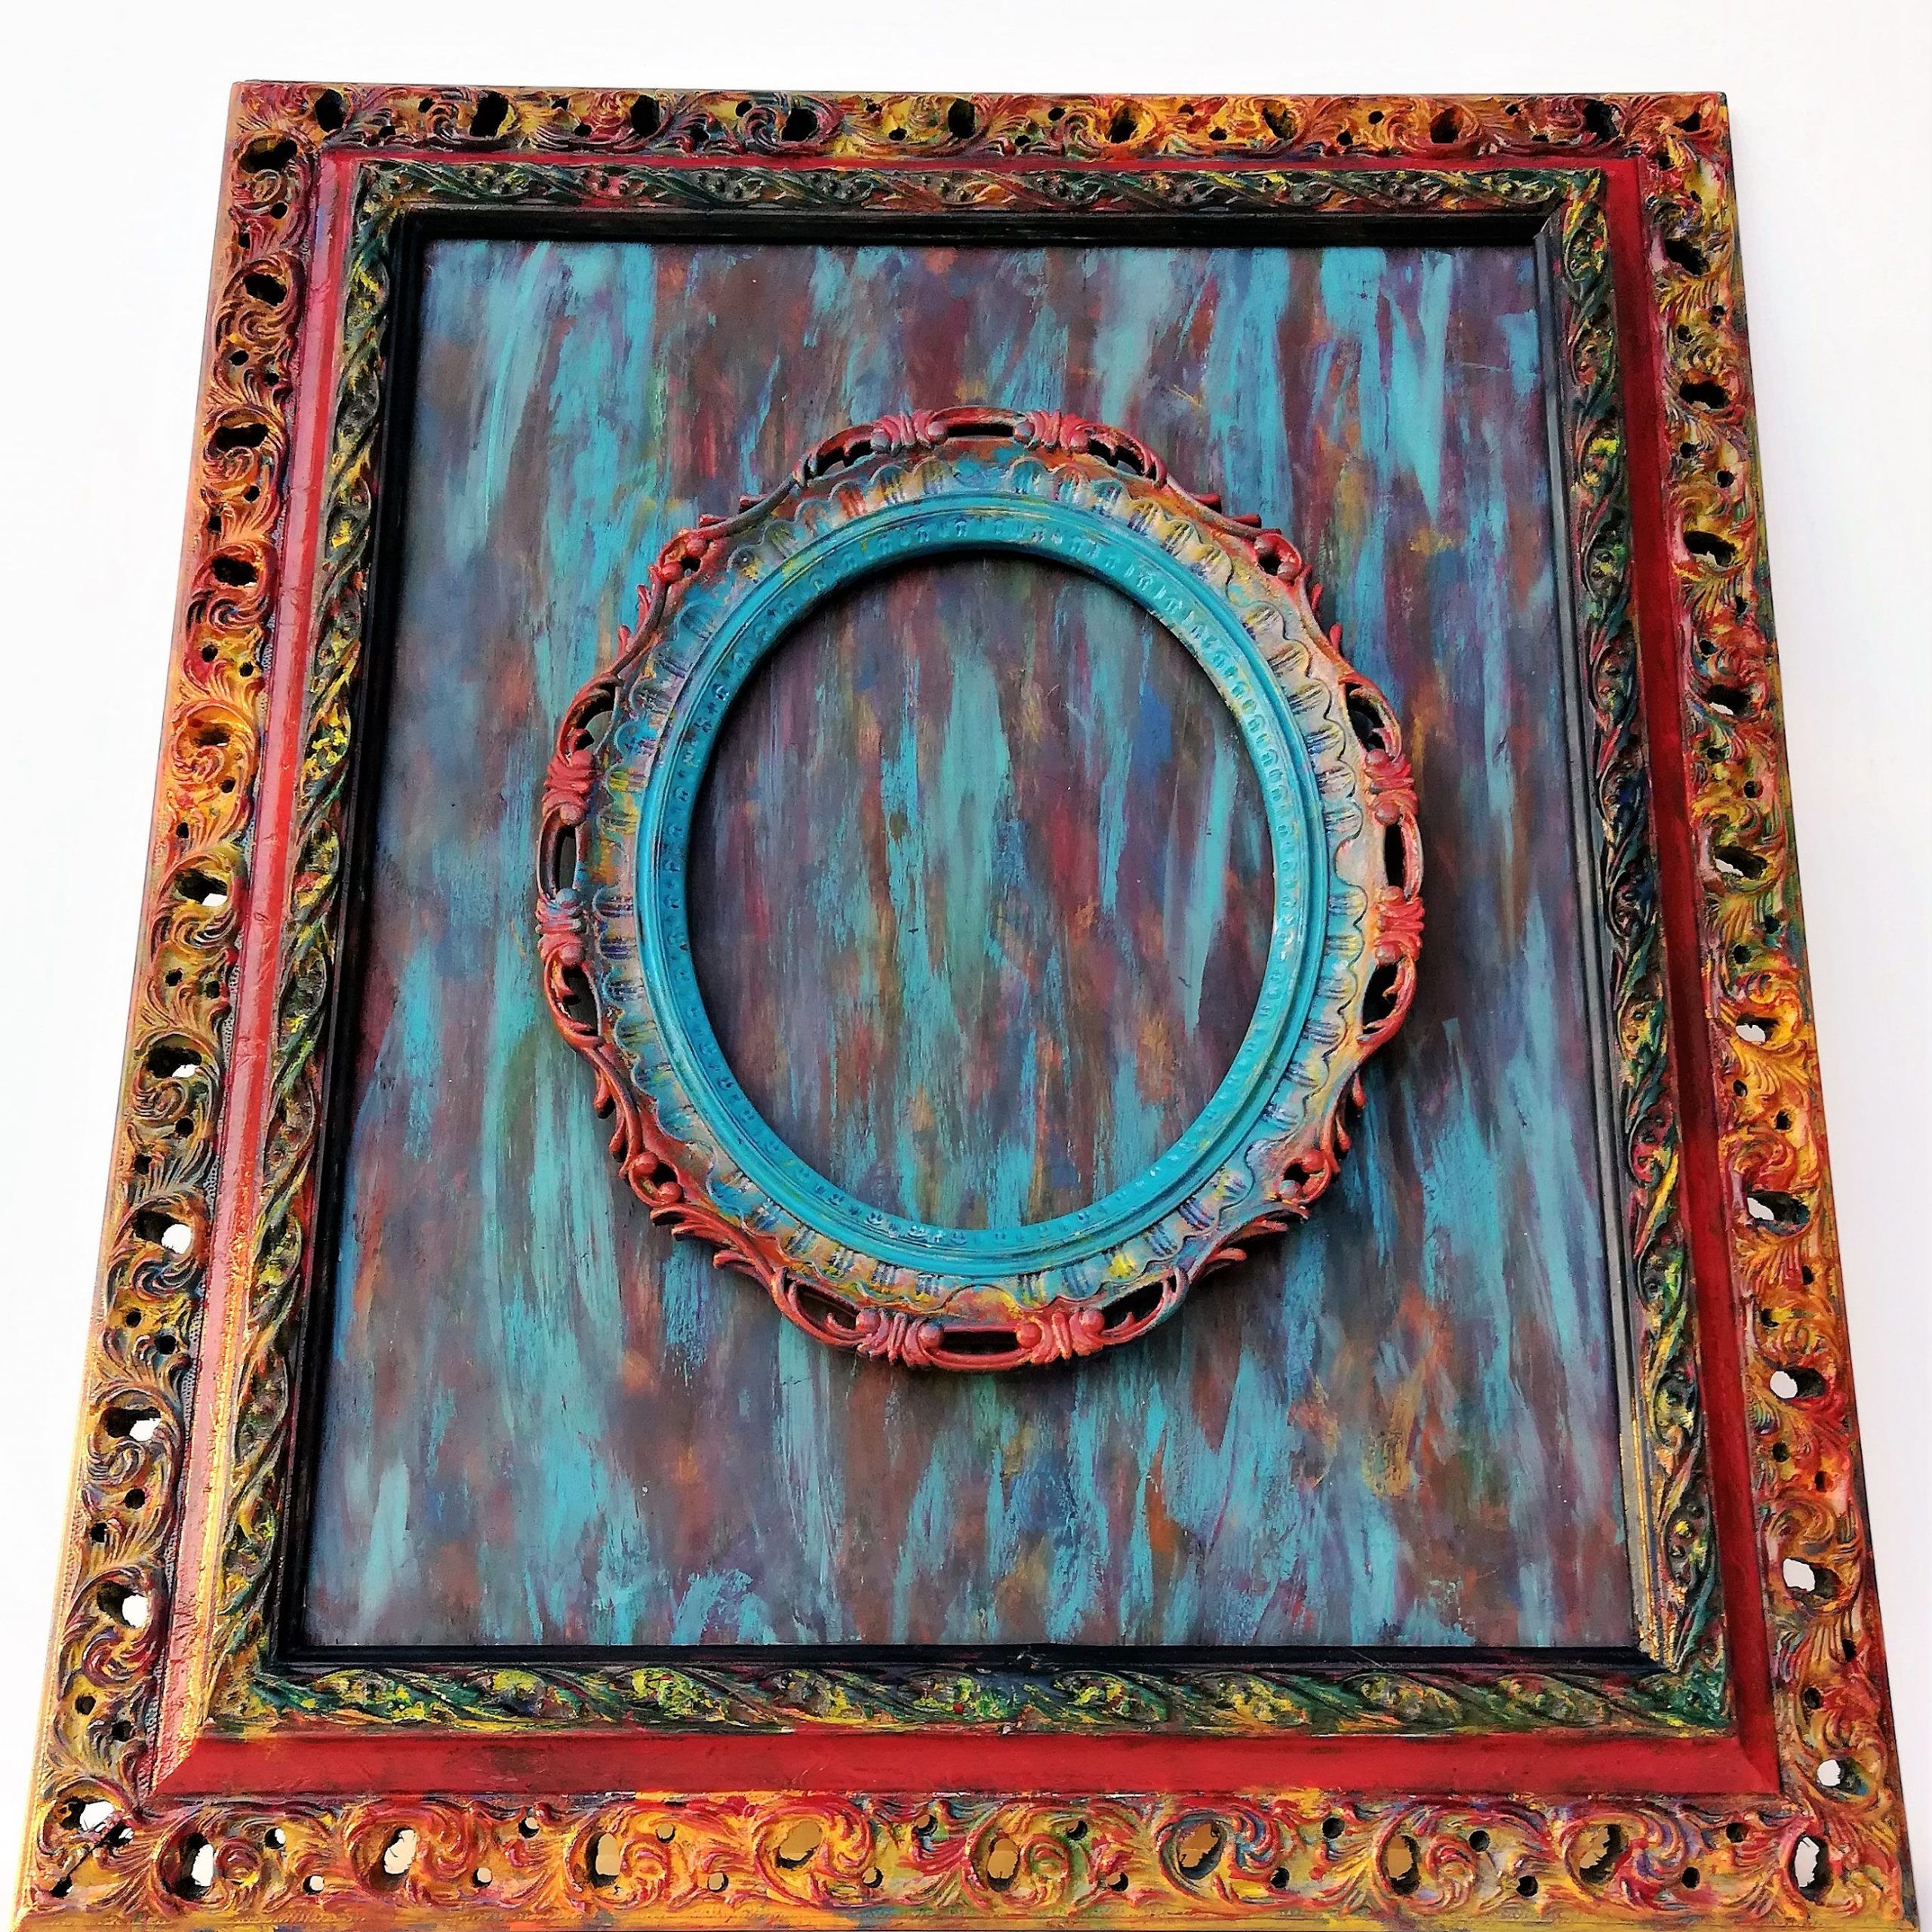 Ornate Style Wall Frame, Wall Hanging, Vintage Decor, Wall Regarding Most Recent Elegant Wood Wall Art (View 16 of 20)